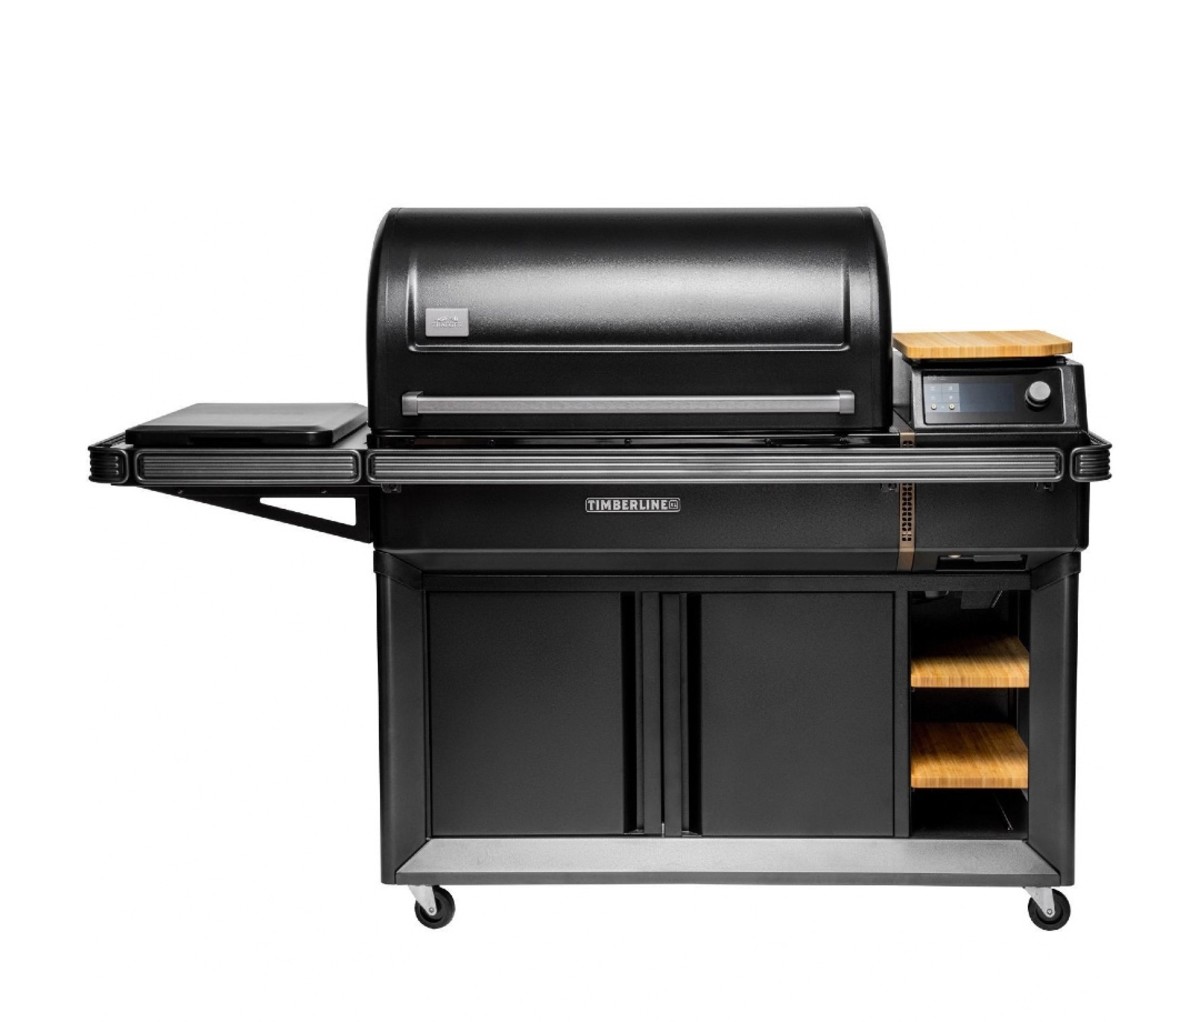 The new Timberline from Trager is a work of pellet grill art, inside and out.